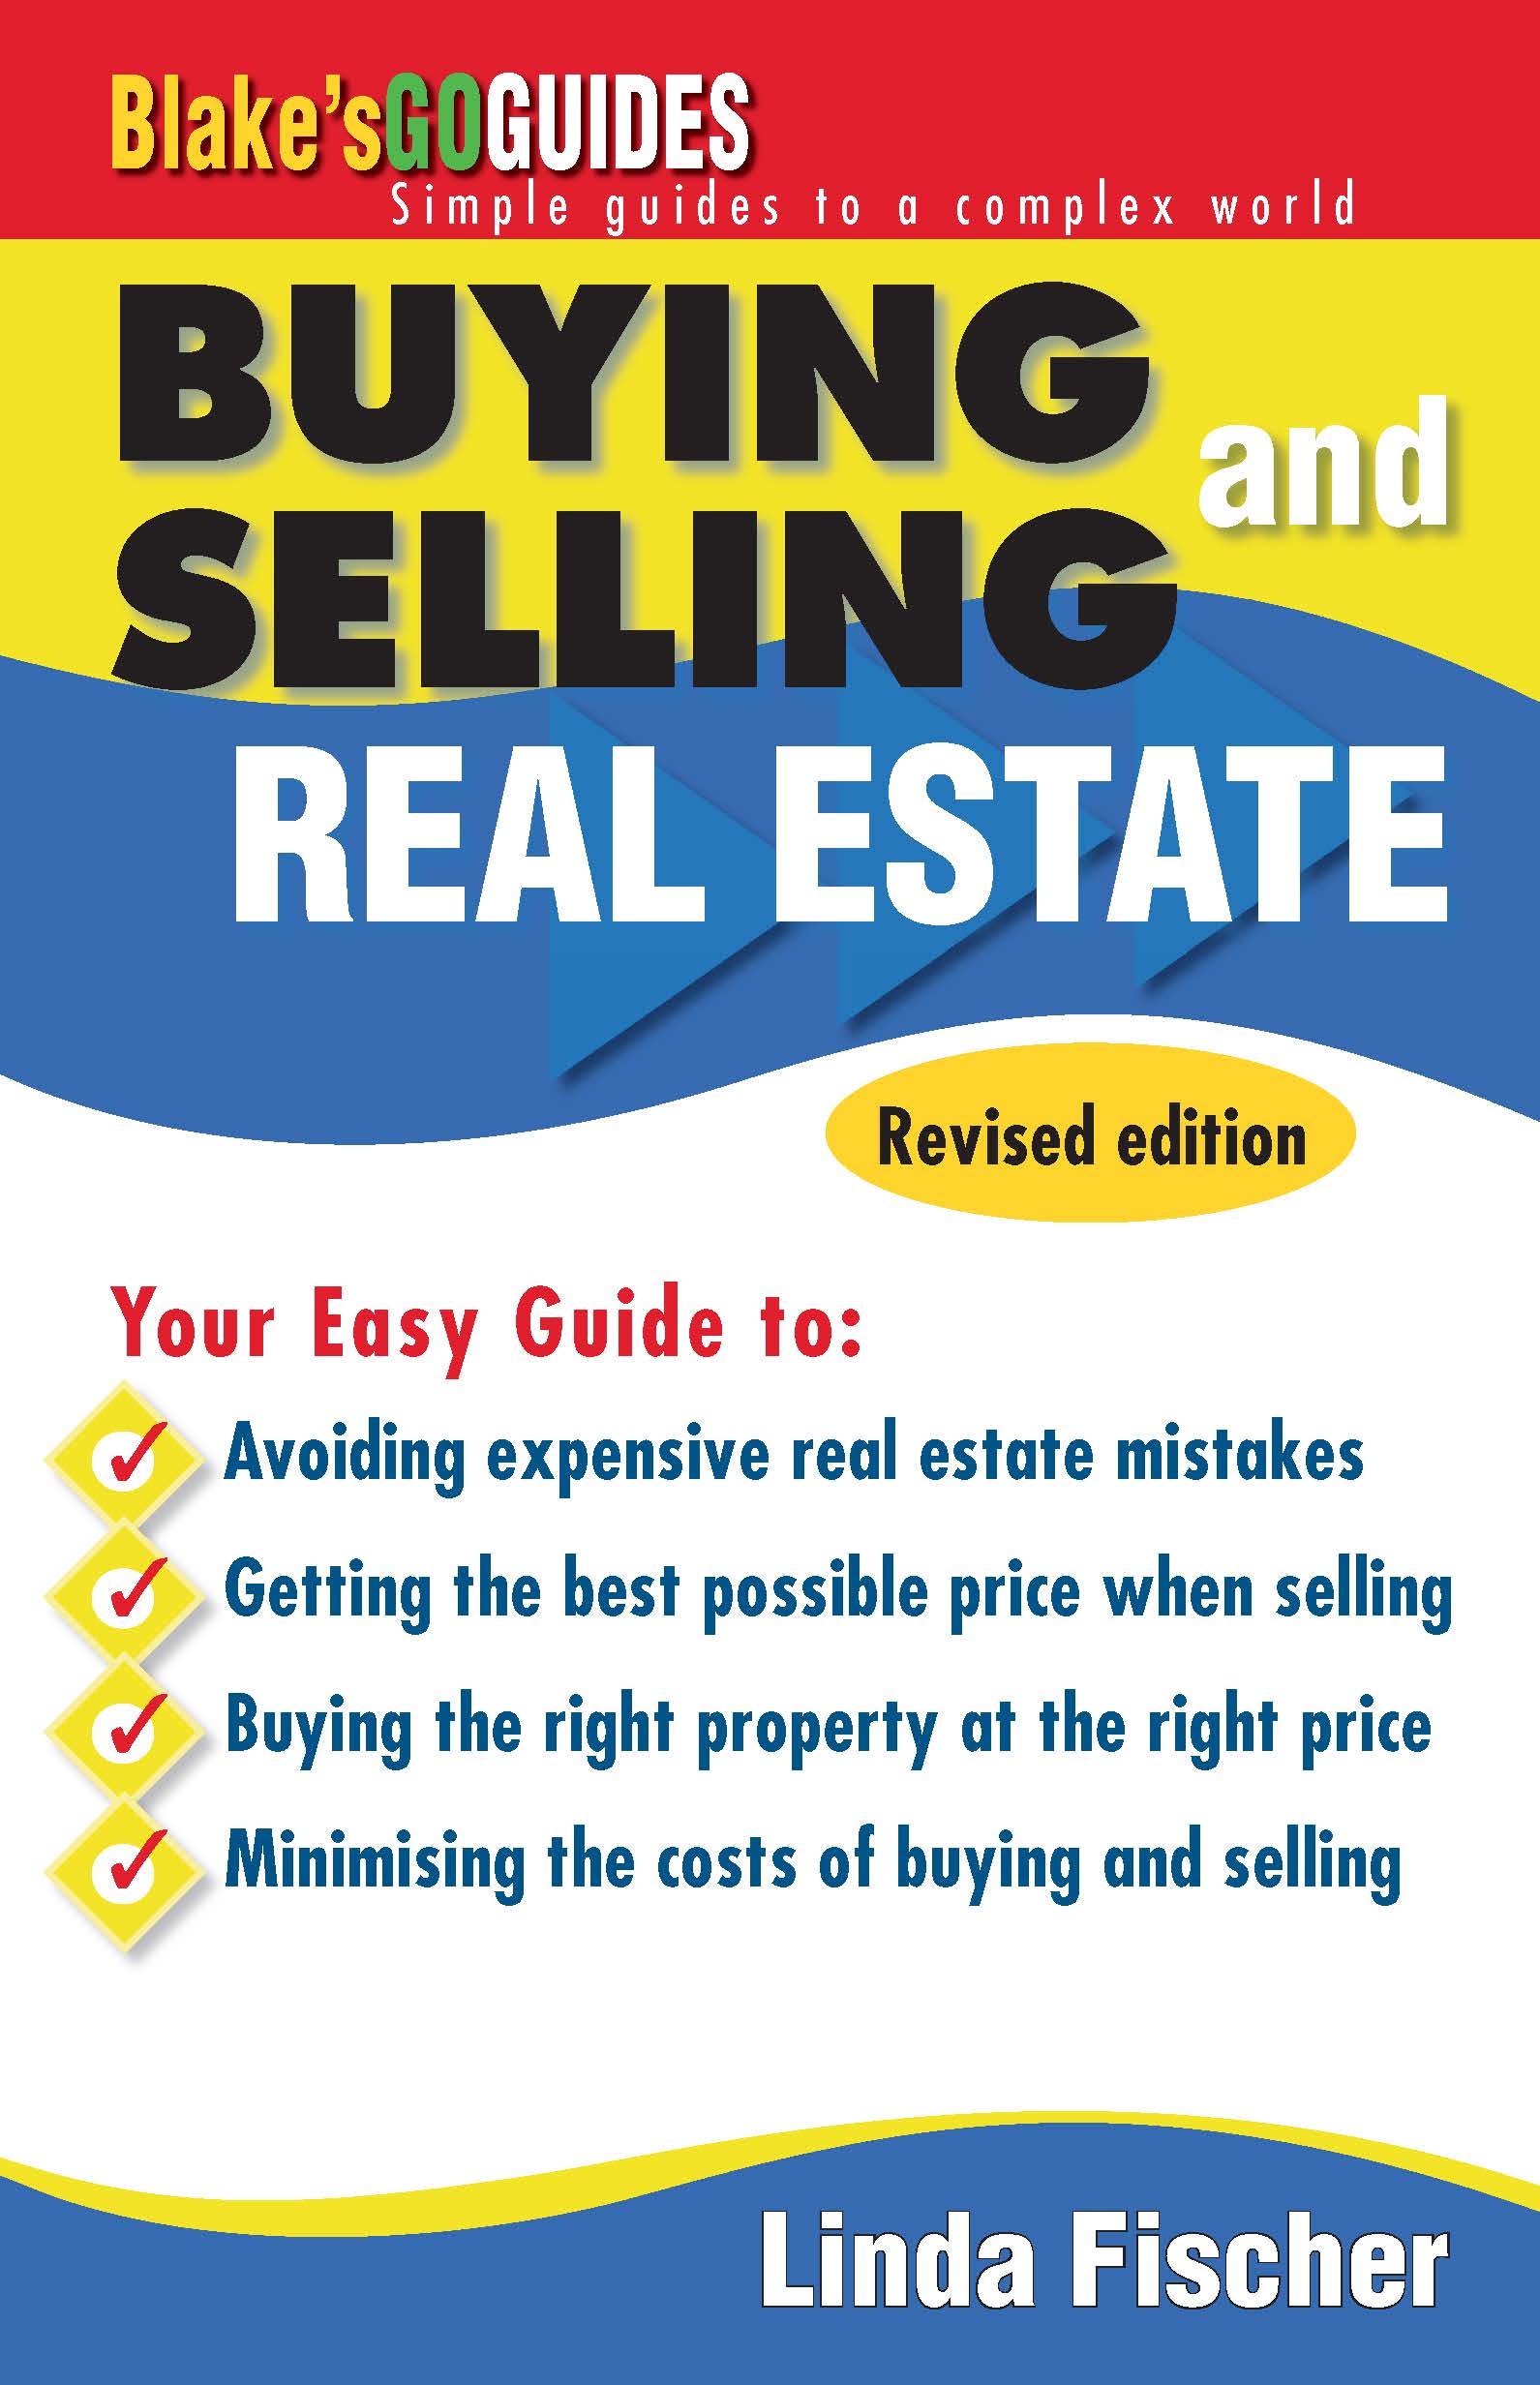 9781877085192-buying-and-selling-real-estate-fc.jpg